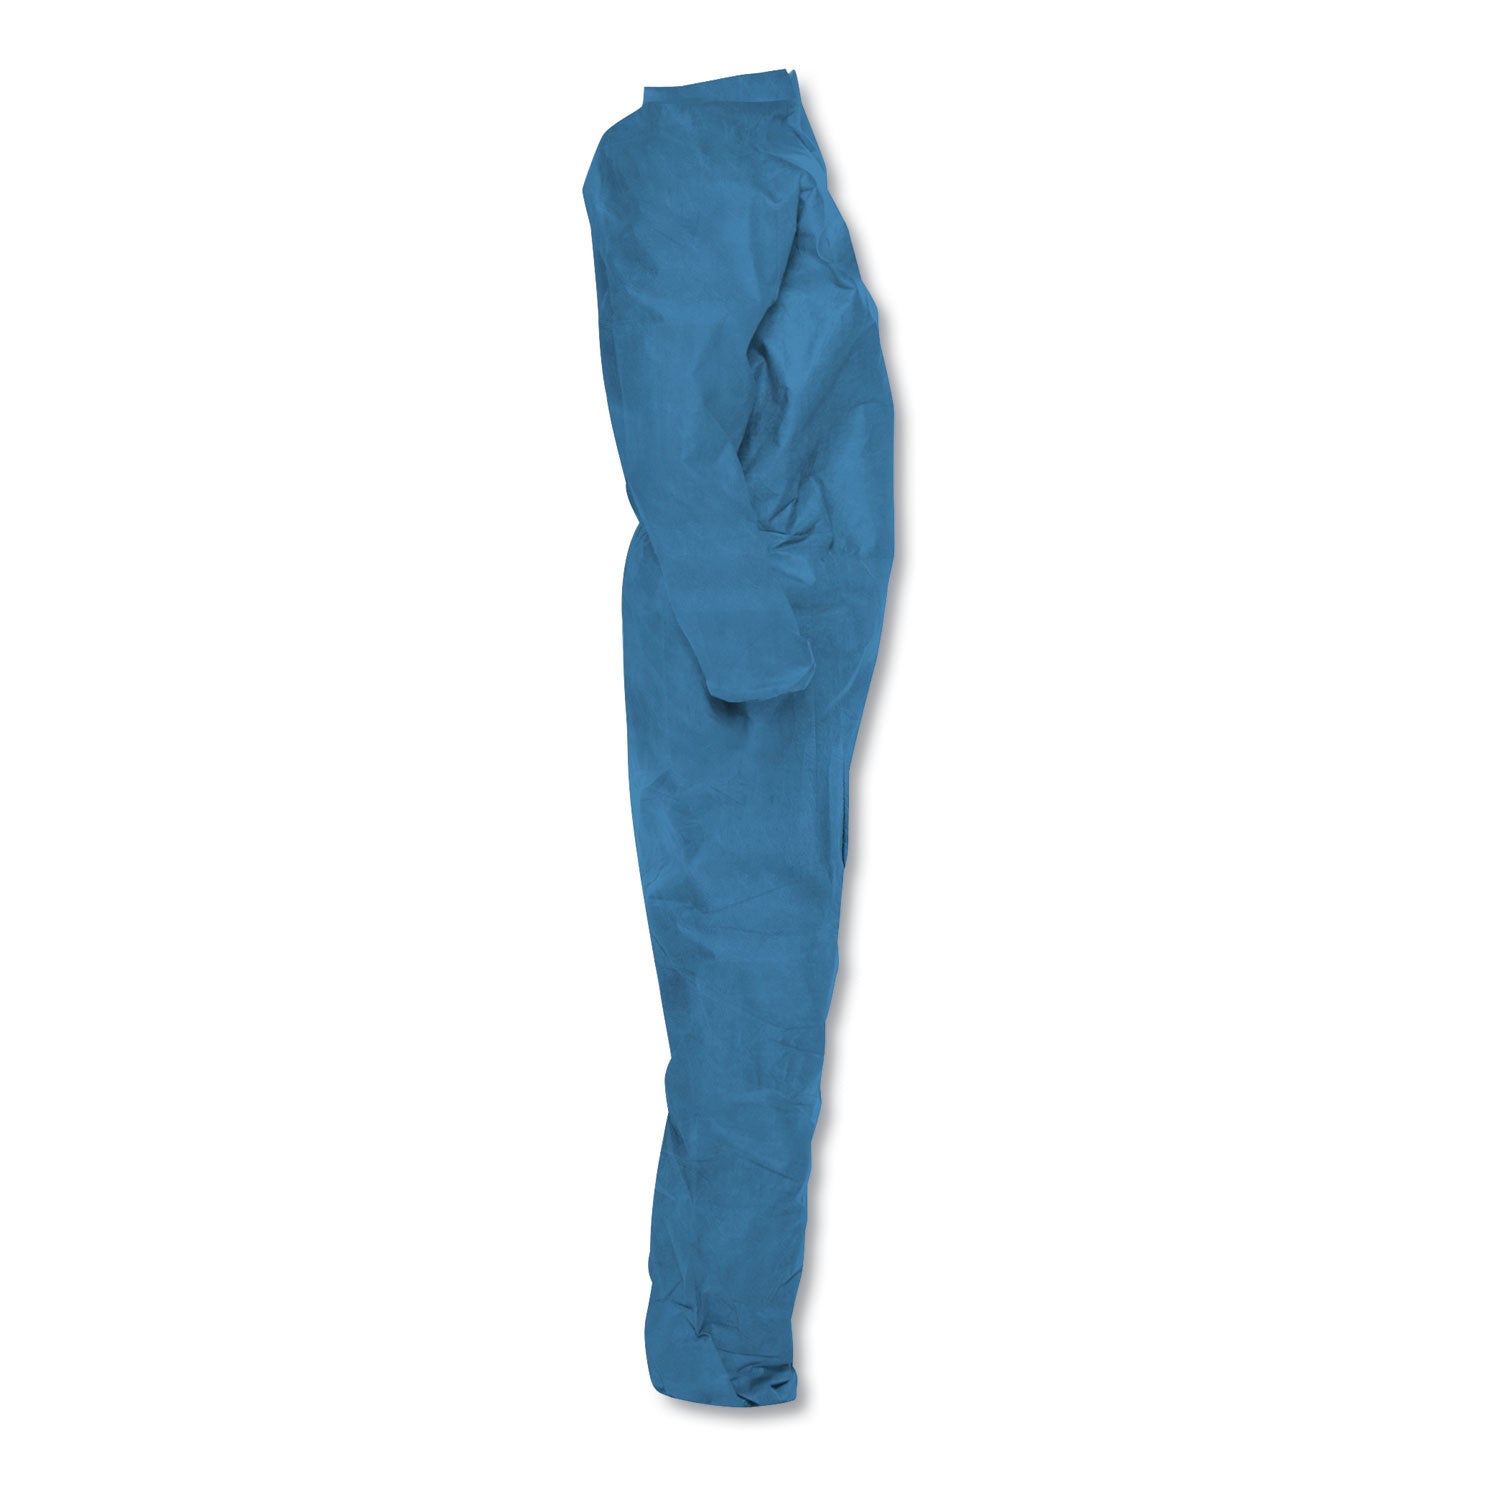 a20-breathable-particle-protection-coveralls-large-blue-24-carton_kcc58533 - 5